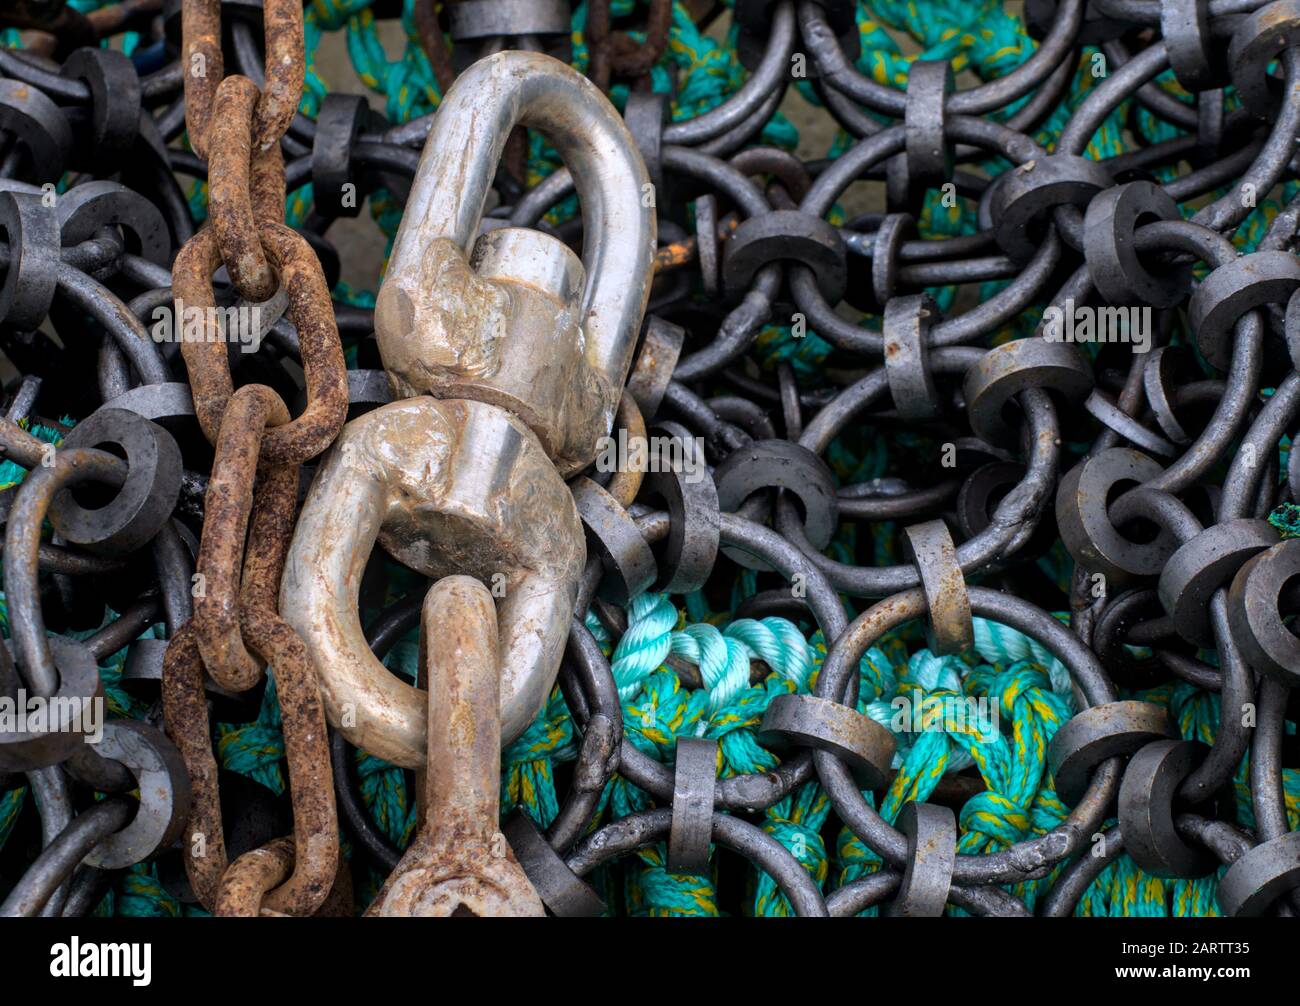 Close up of a fish and oyster dredging net and chain Stock Photo